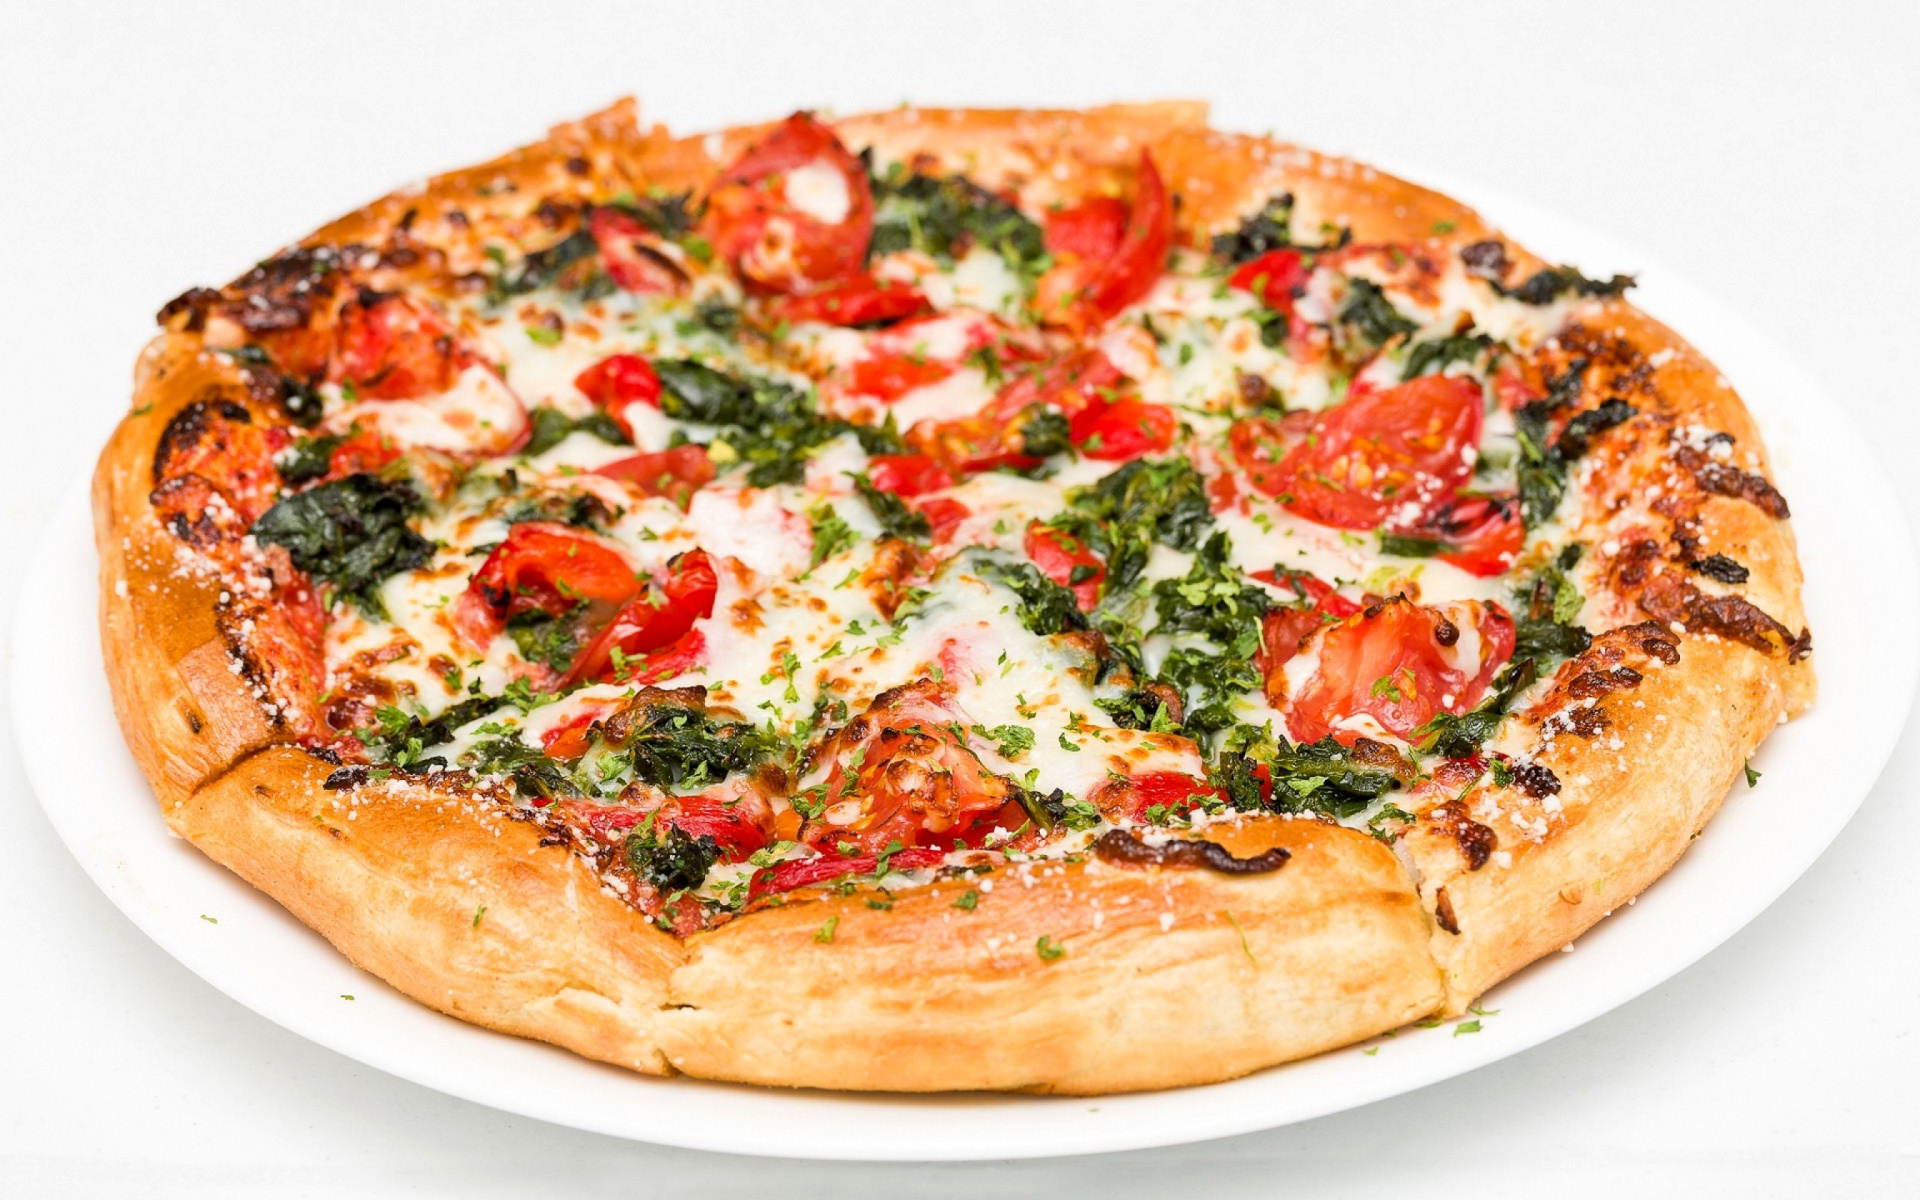 Pizza with spinach screenshot #1 1920x1200